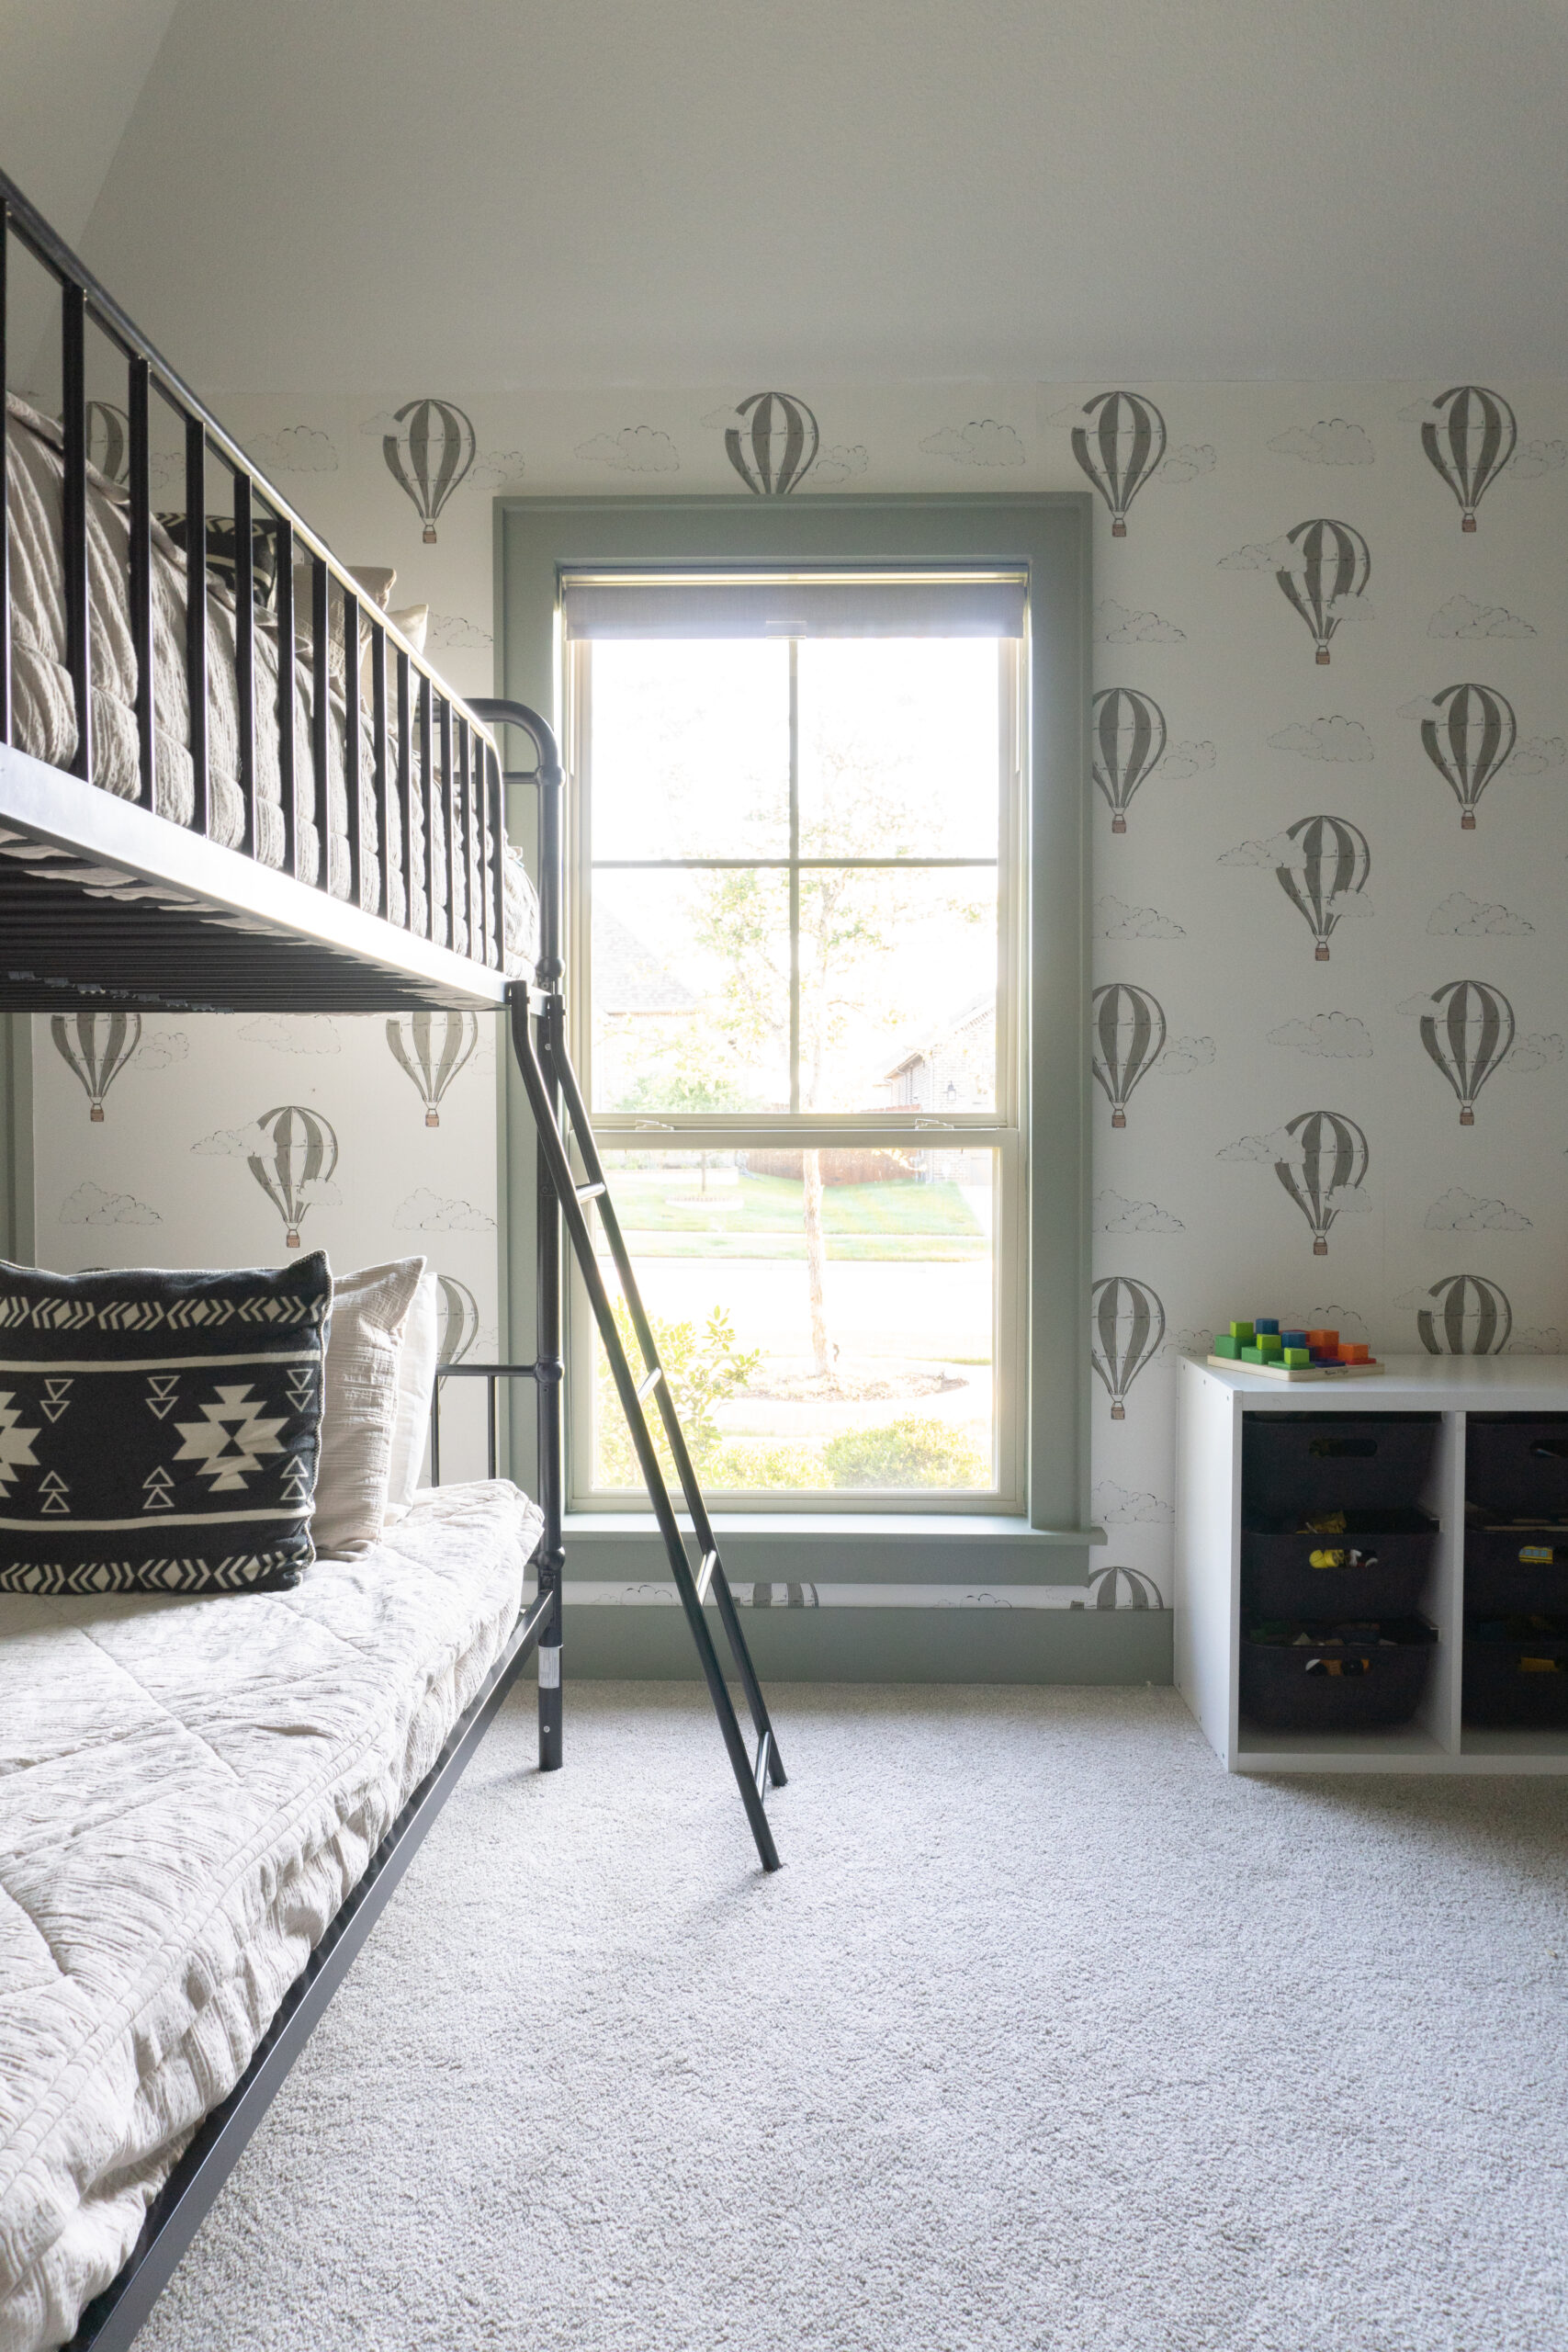 National Parks Boys Room featuring Hot Air Balloon Wallpaper